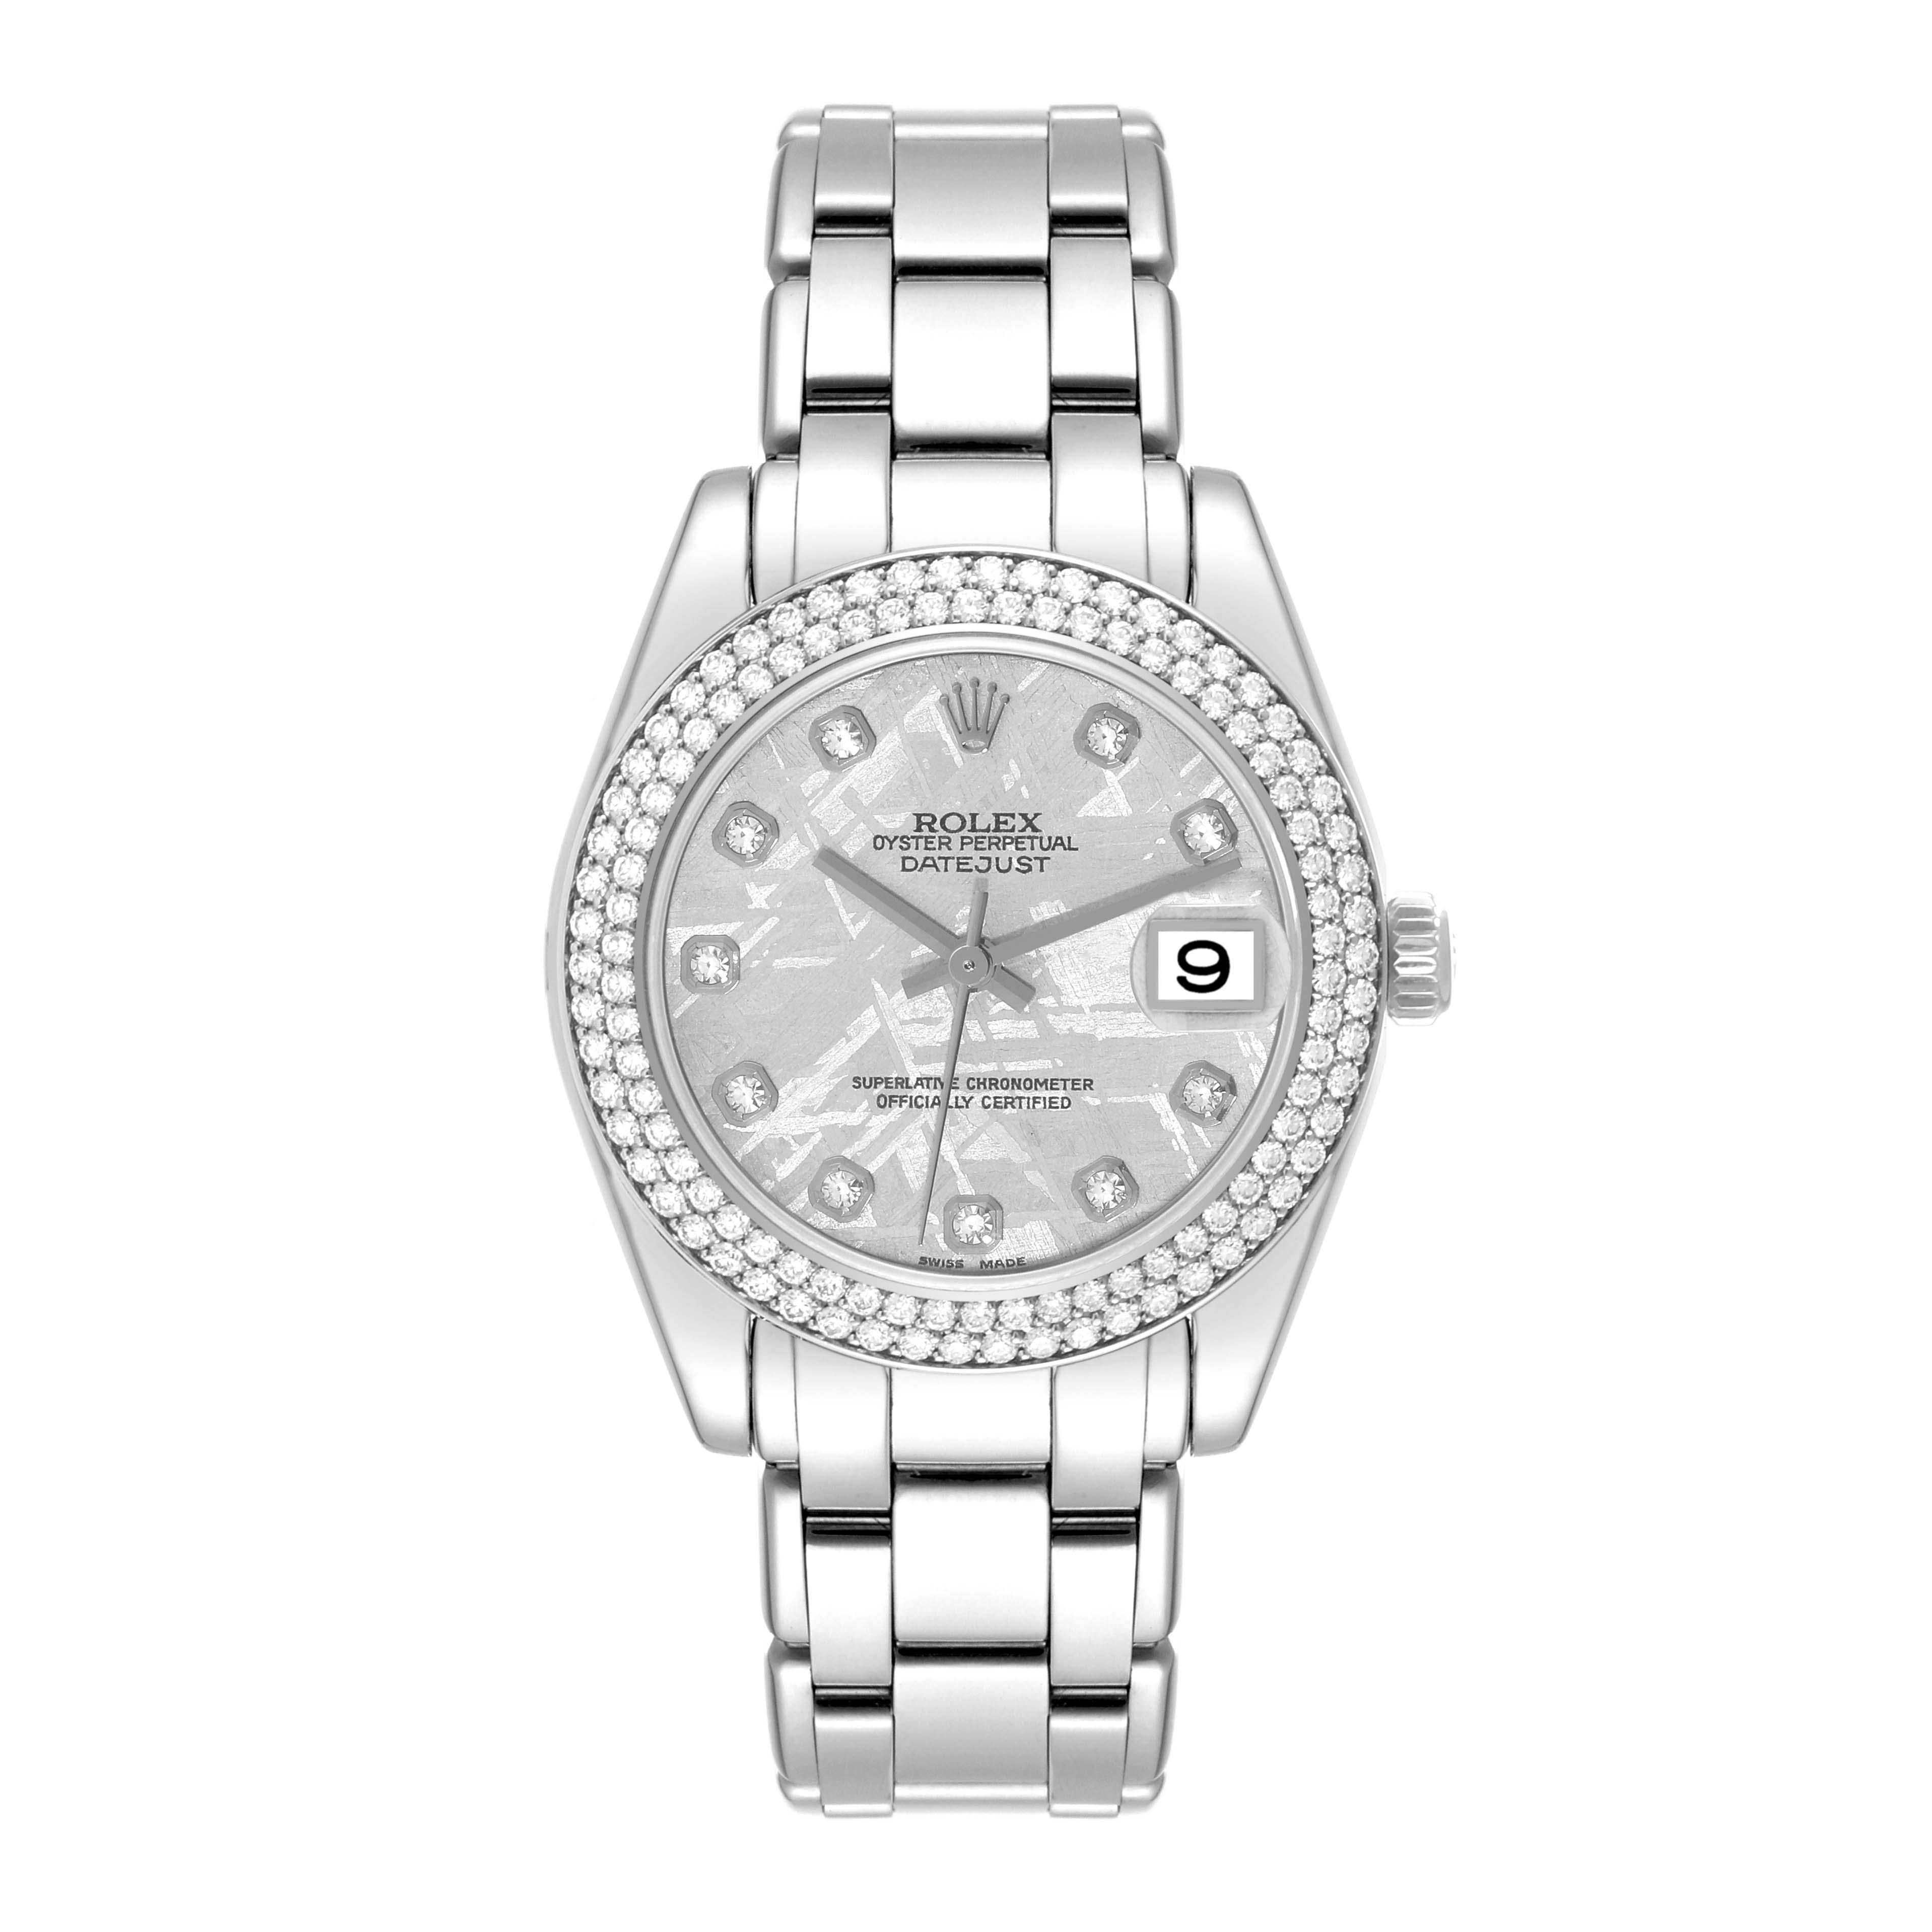 Rolex Pearlmaster 34 White Gold Meteorite Dial Diamond Ladies Watch 81339. Officially certified chronometer self-winding movement. 18k white gold oyster case 34.0 mm in diameter. Rolex logo on the crown. Original Rolex factory diamond bezel. Scratch